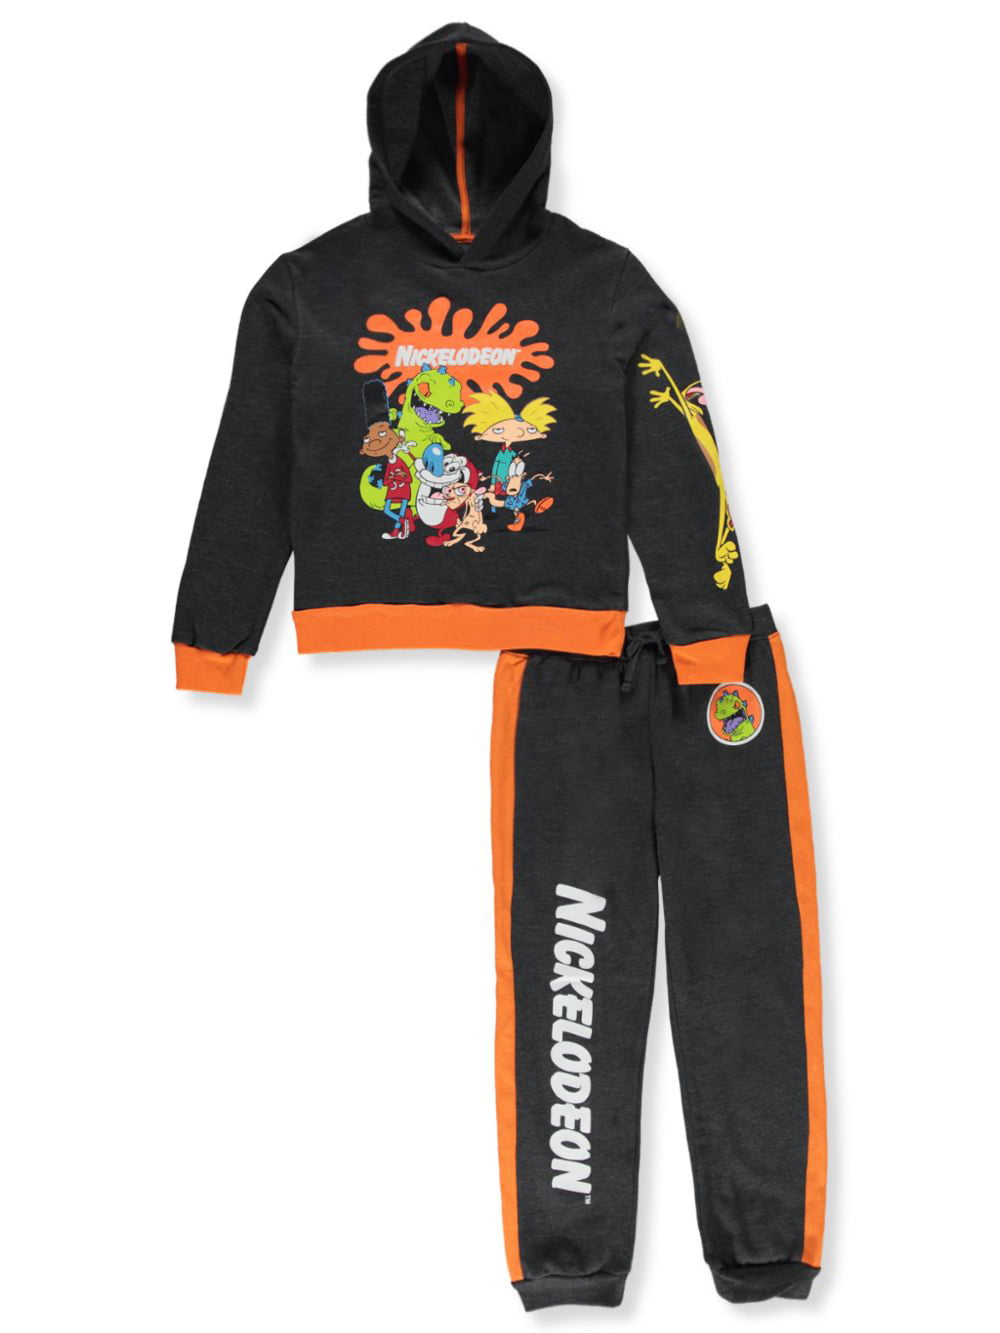 S1ope Boys Savage 2-Piece Sweatsuit Outfit